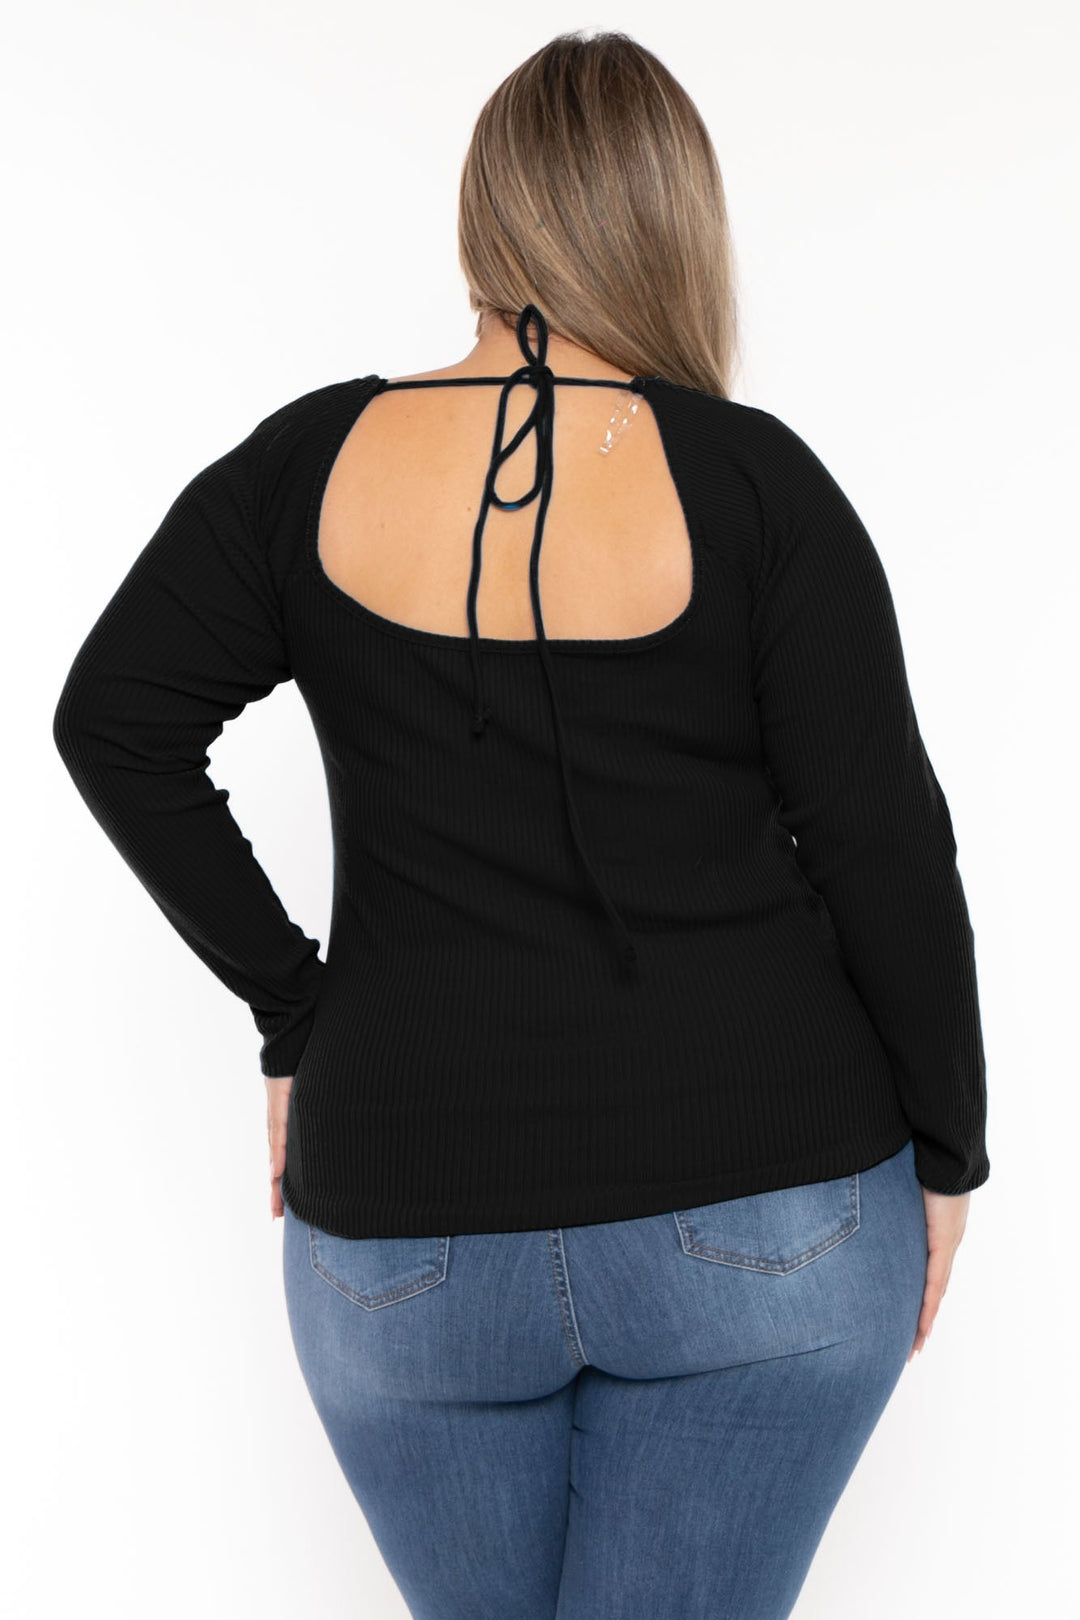 CULTURE CODE Tops Plus Size  Lia Sweetheart Ribbed  Top- Black